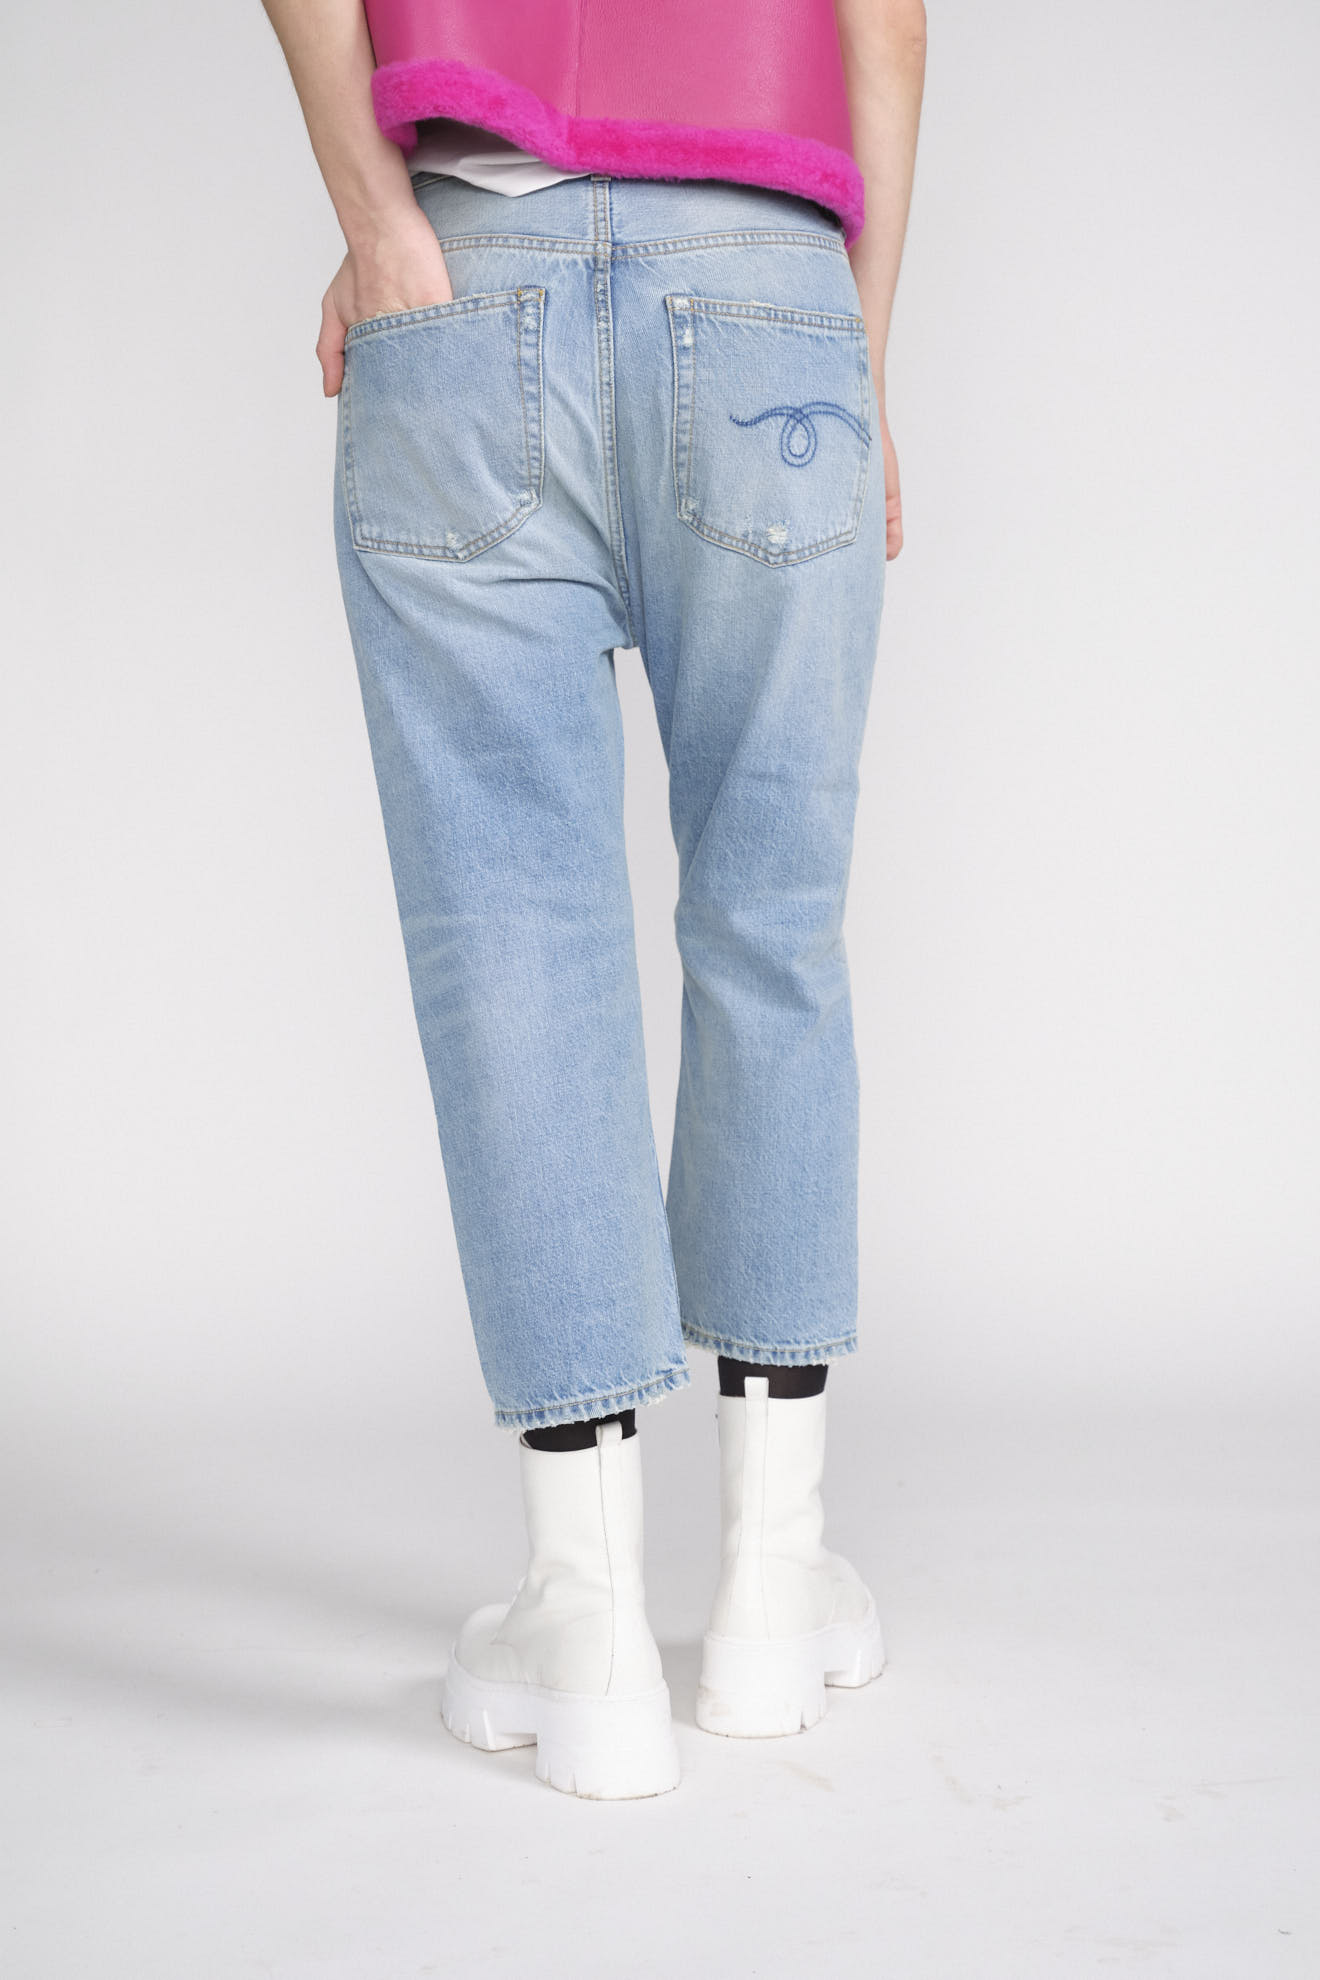 R13 Tailored Drop - Low crotch jeans blue 28